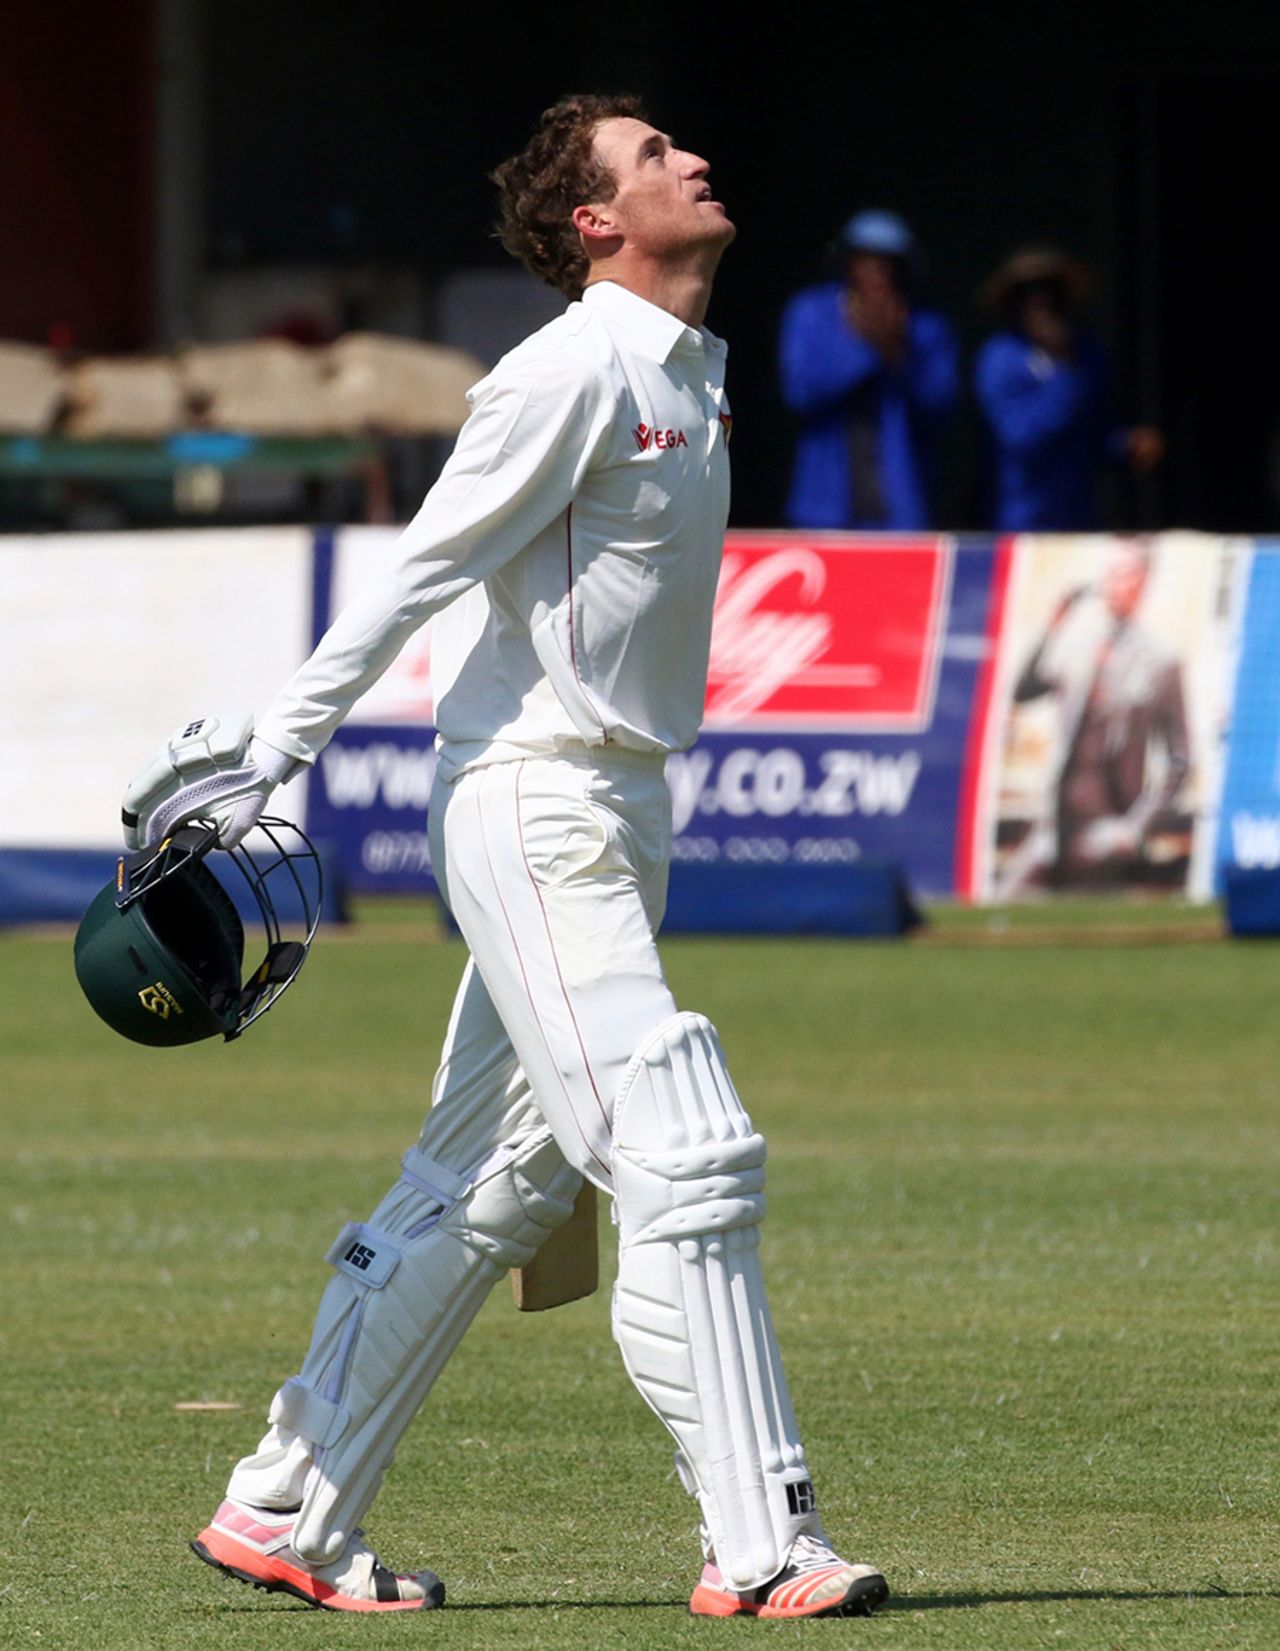 Sean Williams takes a moment after scoring his maiden Test century, Zimbabwe v New Zealand, 1st Test, Bulawayo, 4th day, July 31, 2016